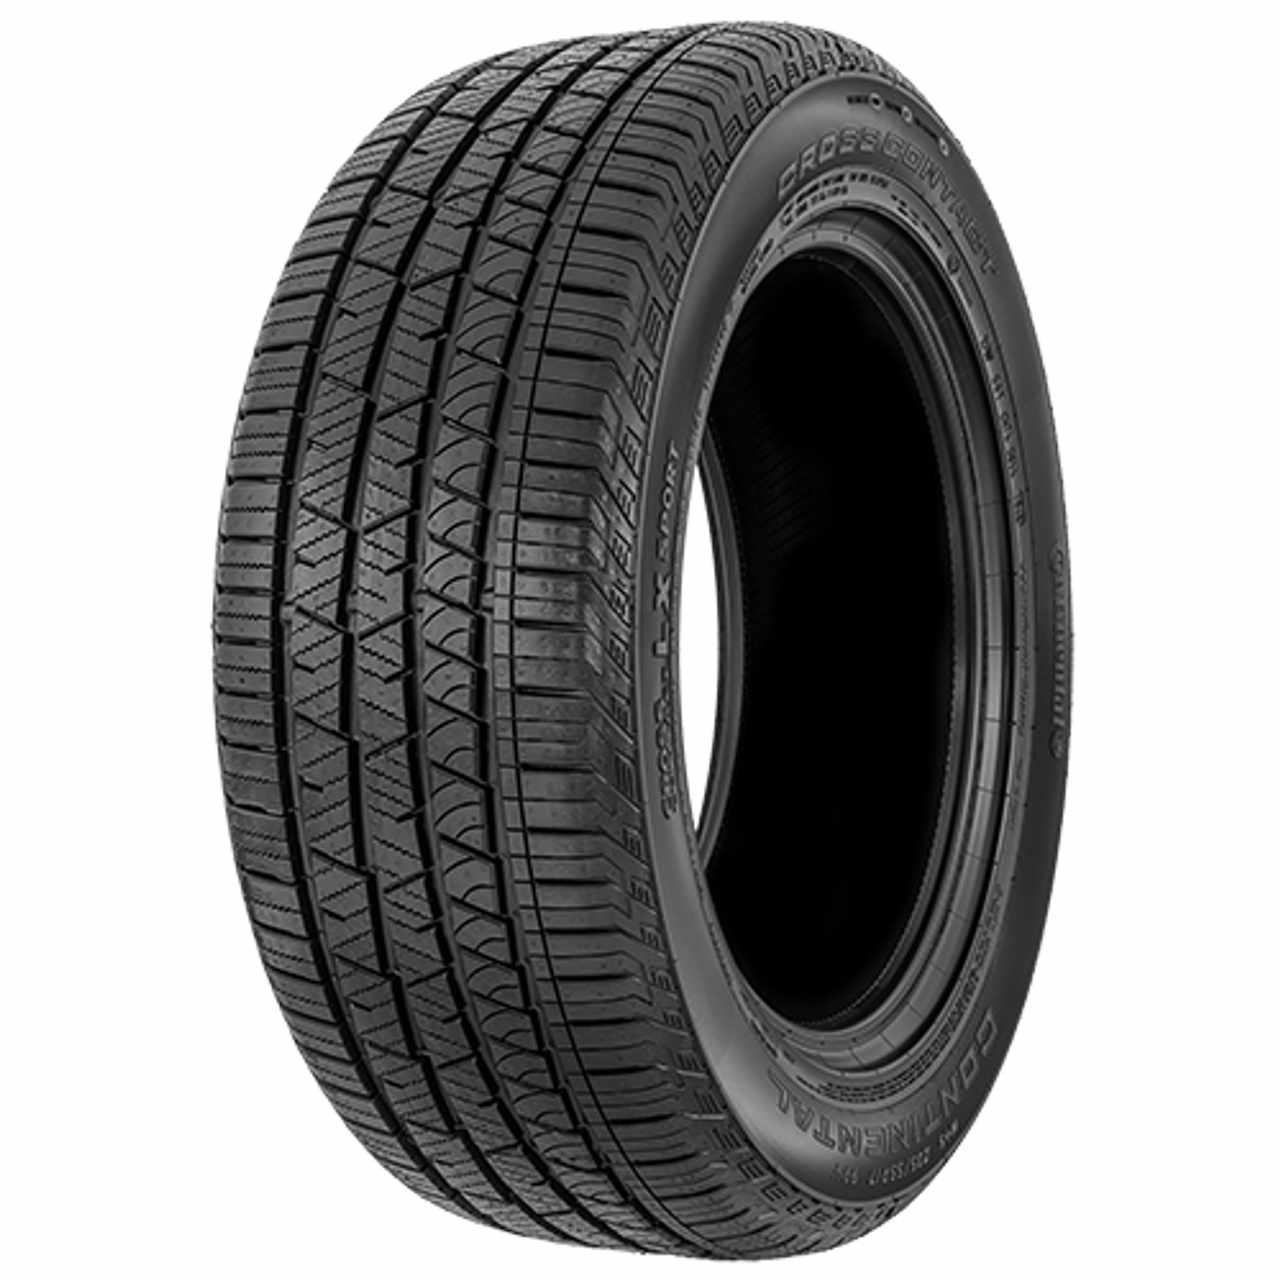 CONTINENTAL CROSSCONTACT LX SPORT (MO) (EVc) 275/45R21 107H FR BSW von Continental